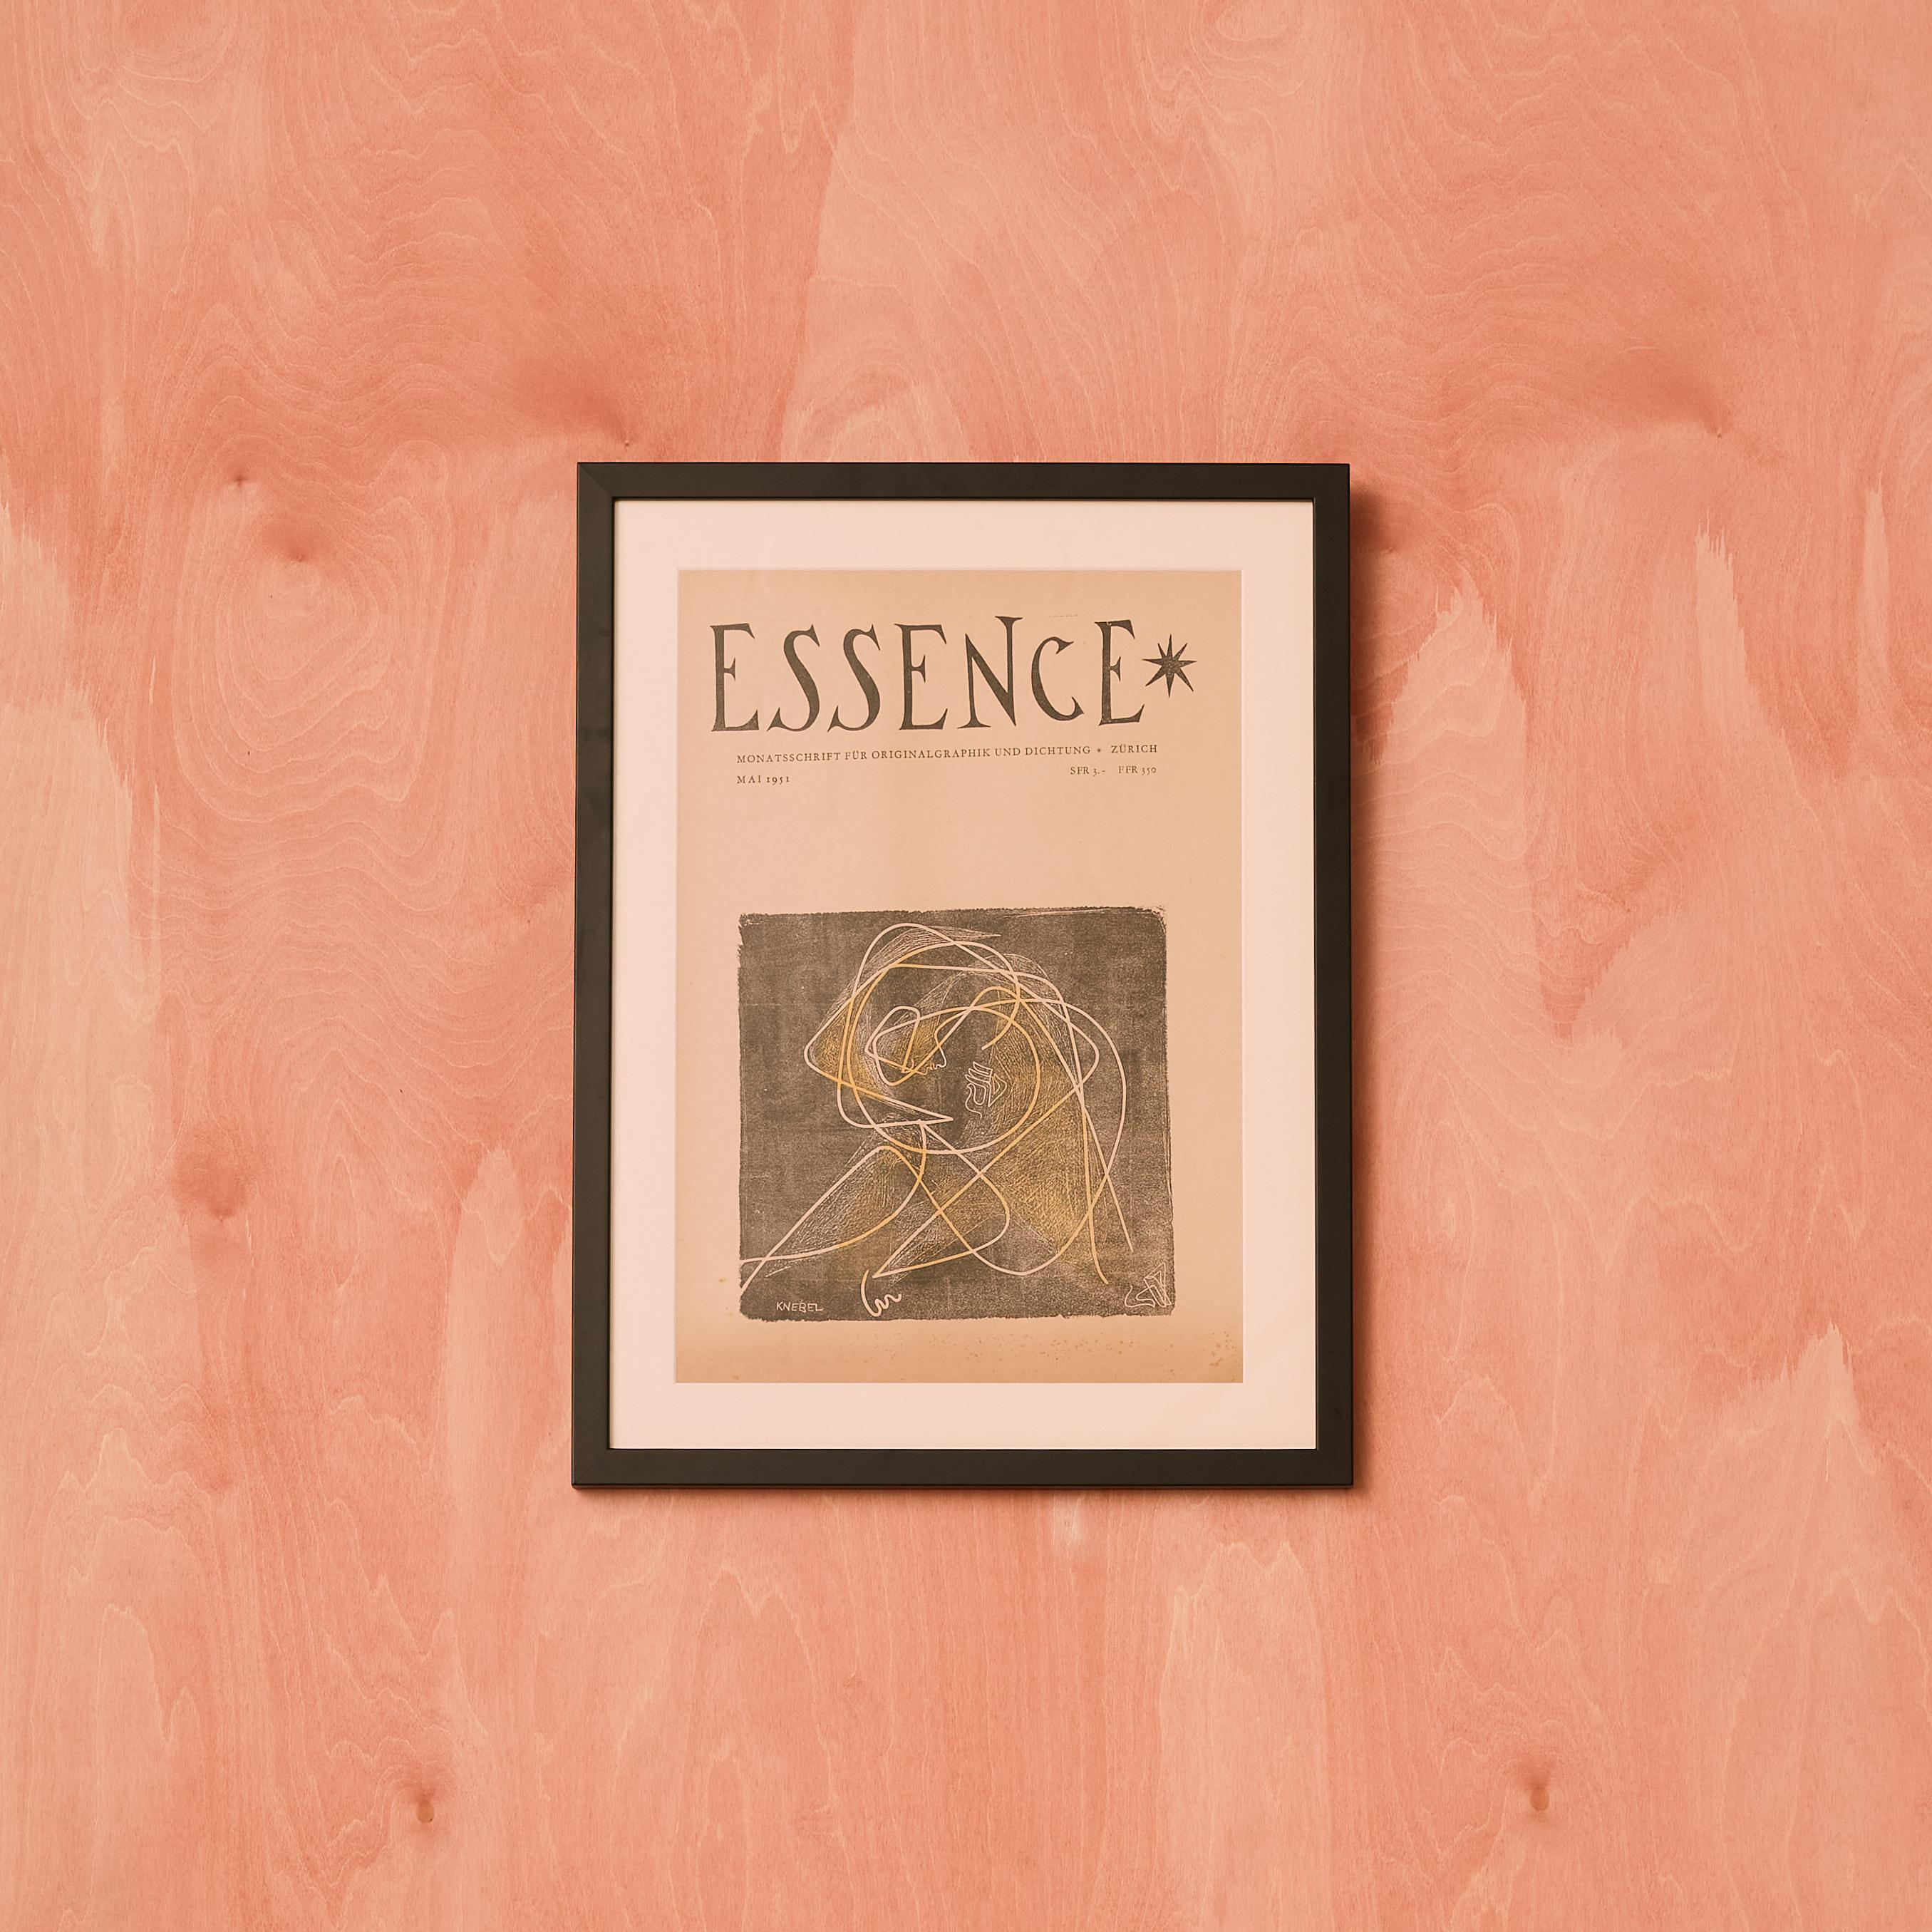 A set of three framed posters for 'Essence*